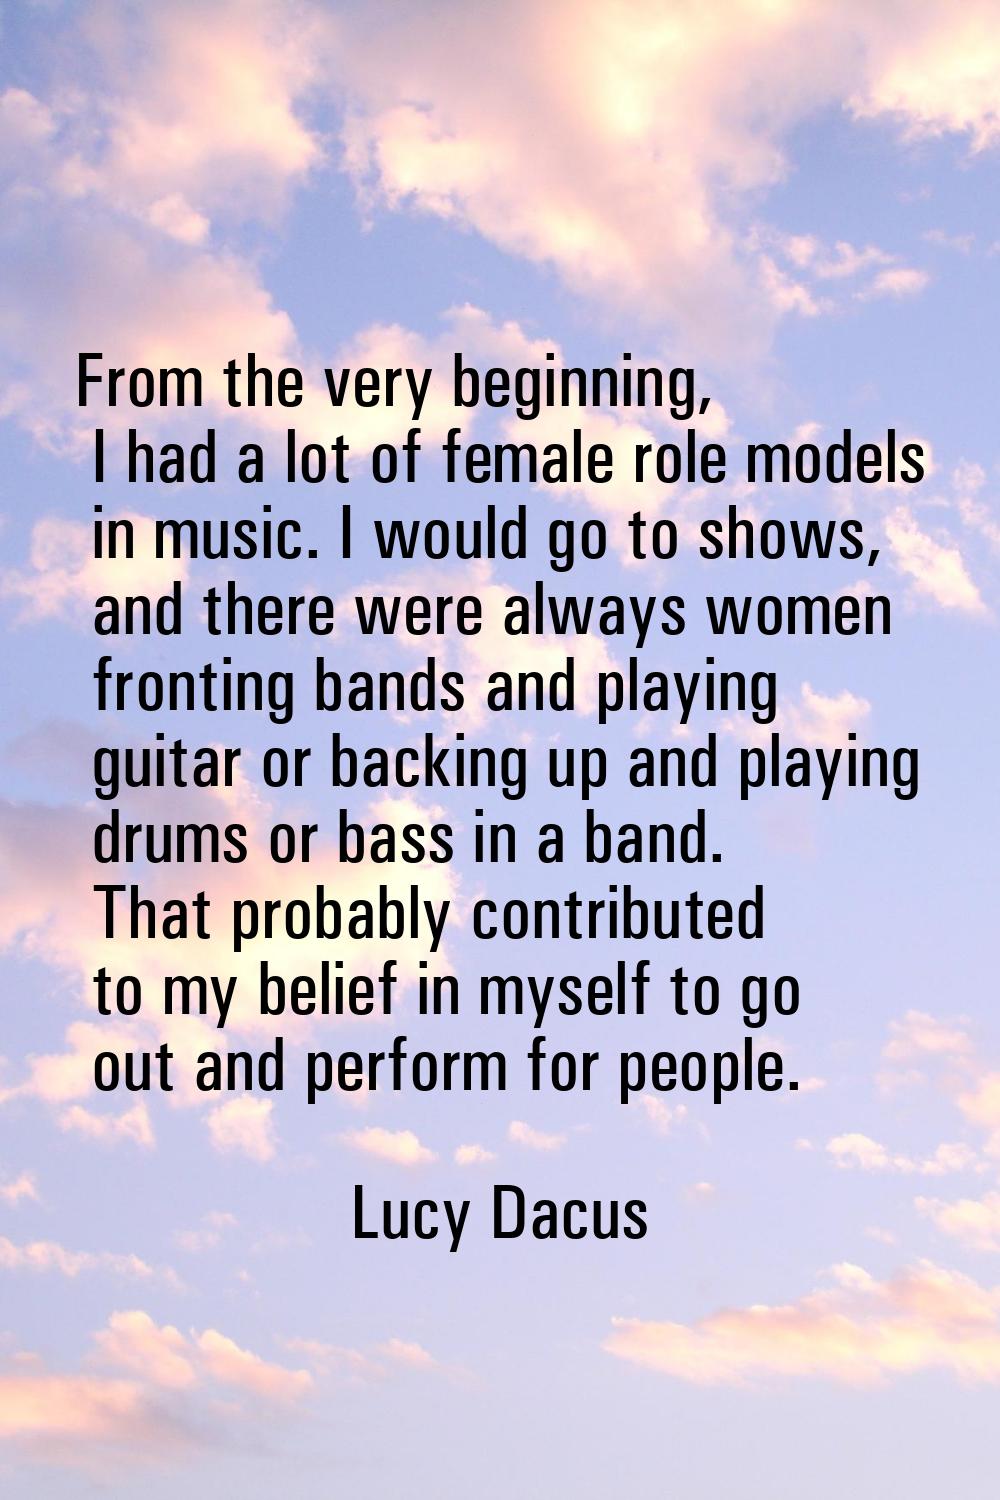 From the very beginning, I had a lot of female role models in music. I would go to shows, and there